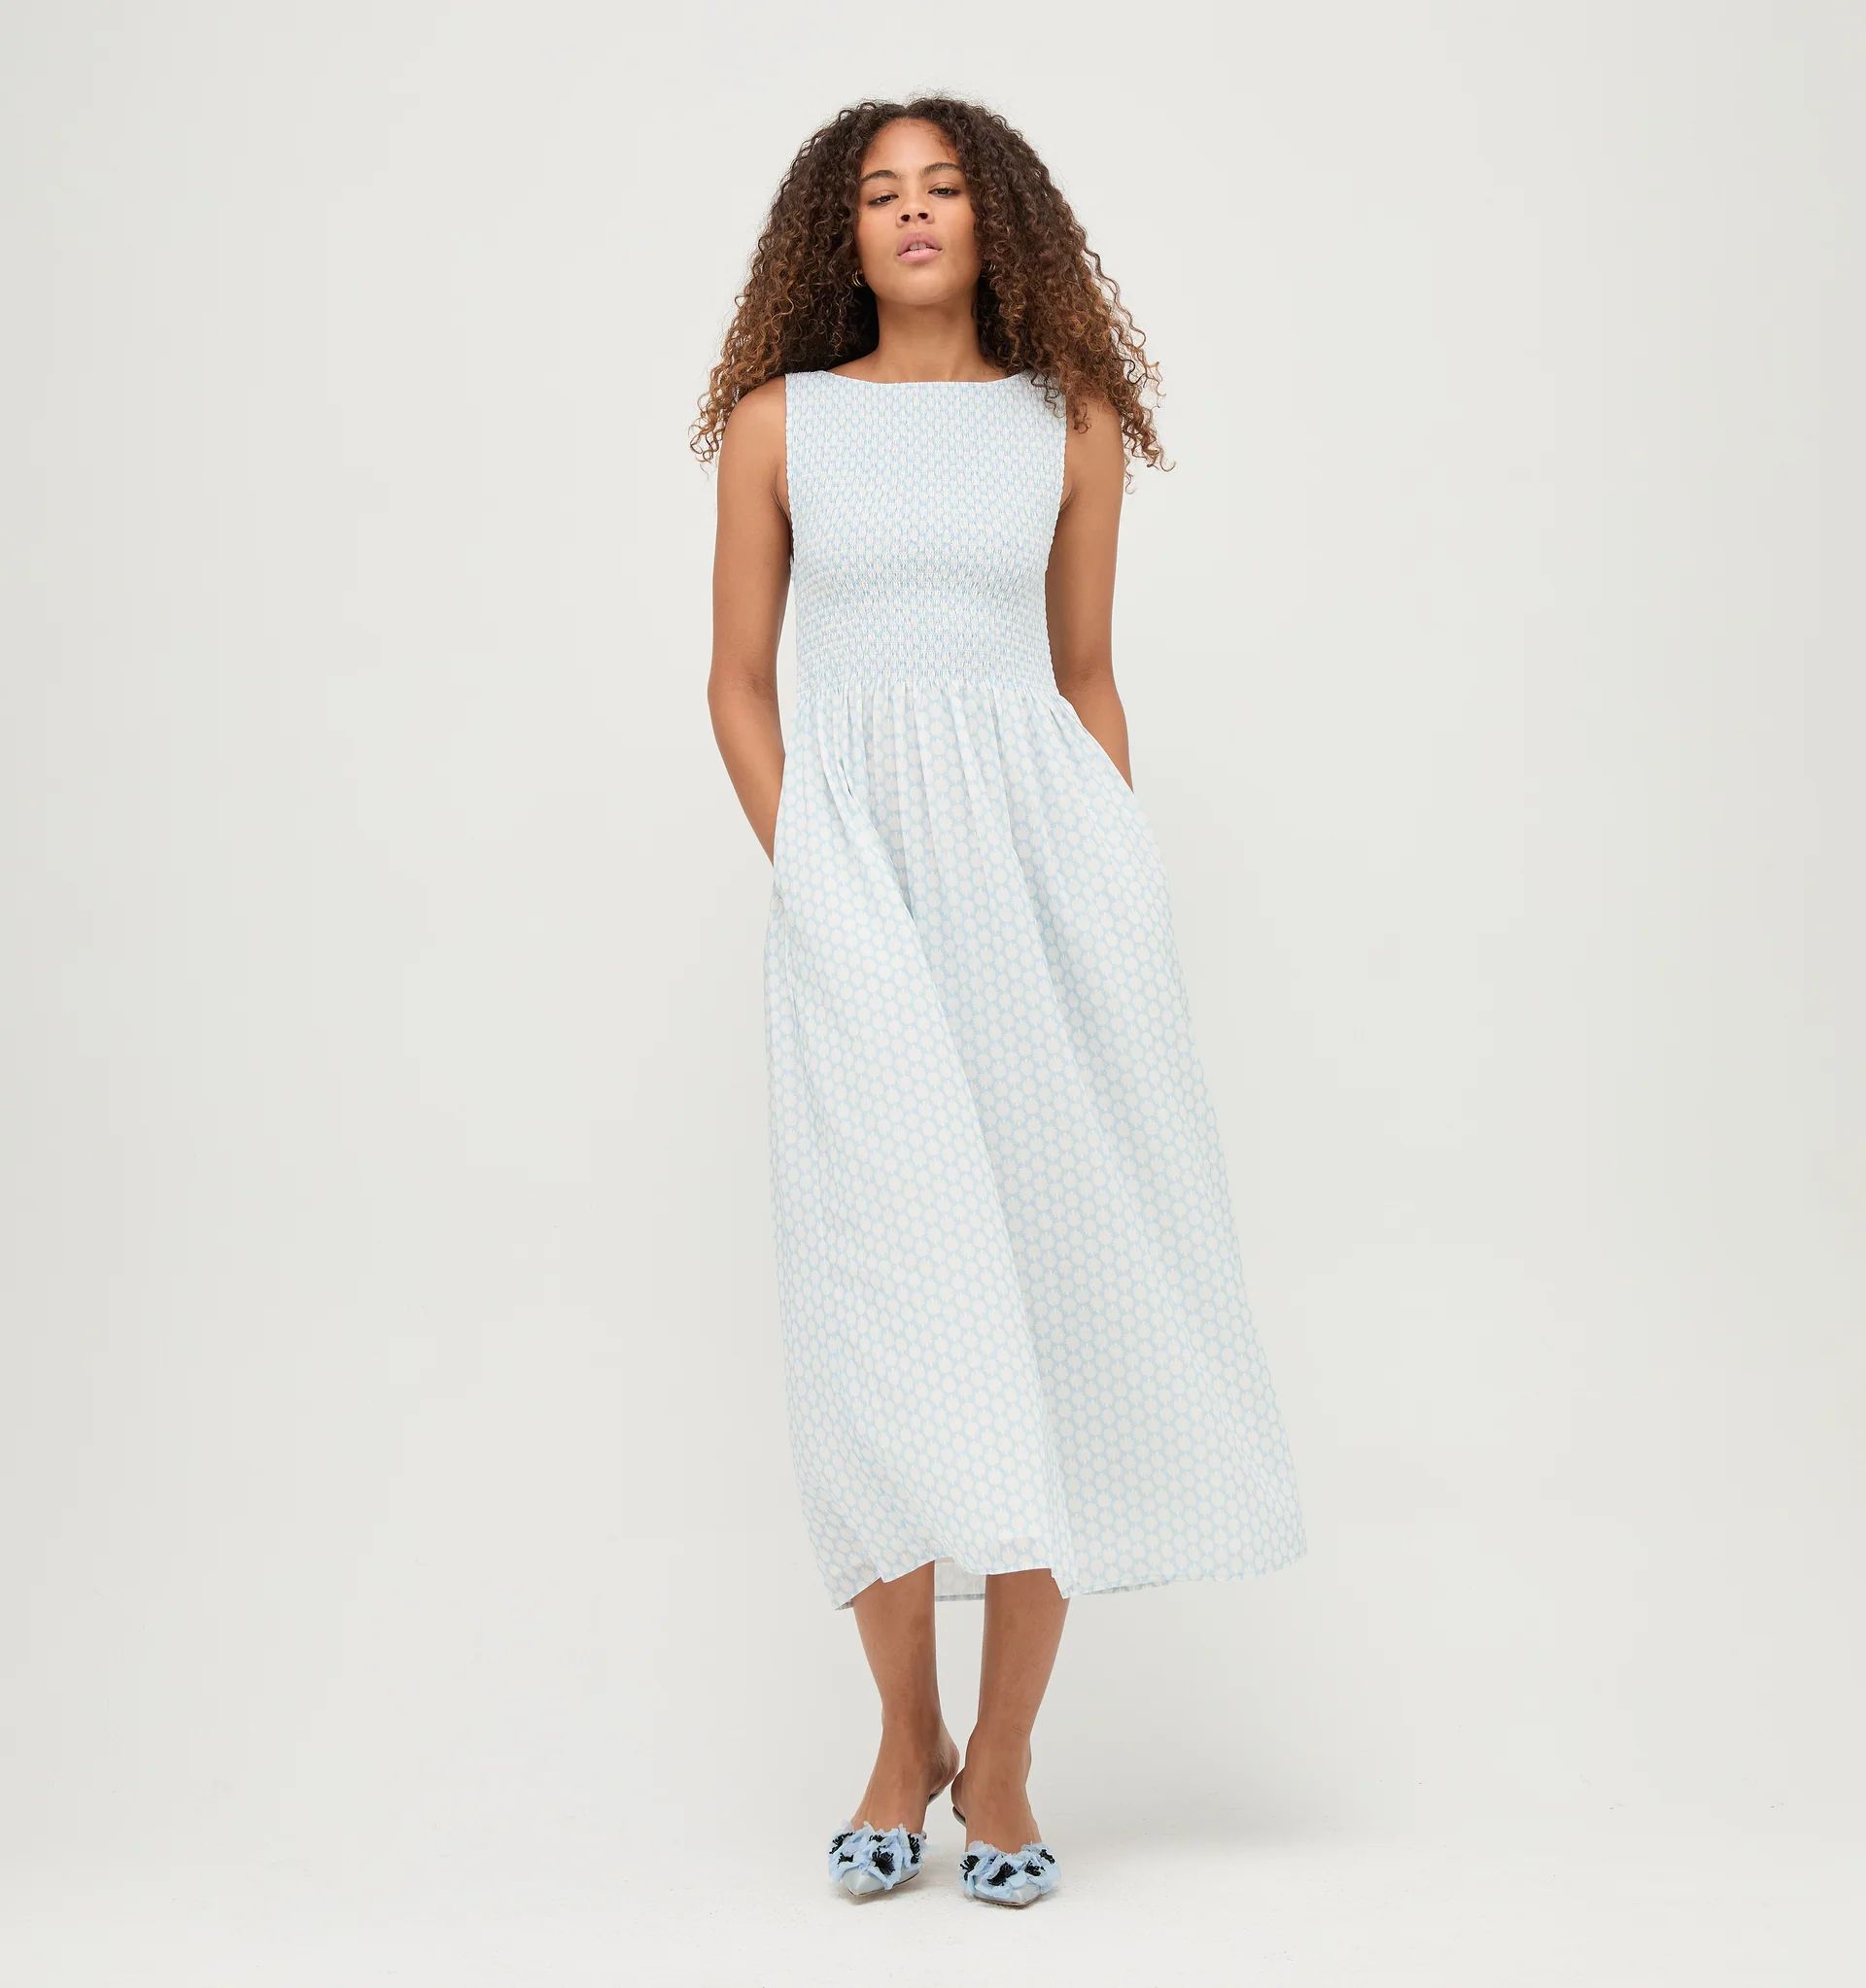 The Cosima Nap Dress - Powder Blue Baroque Shell Voile | Hill House Home